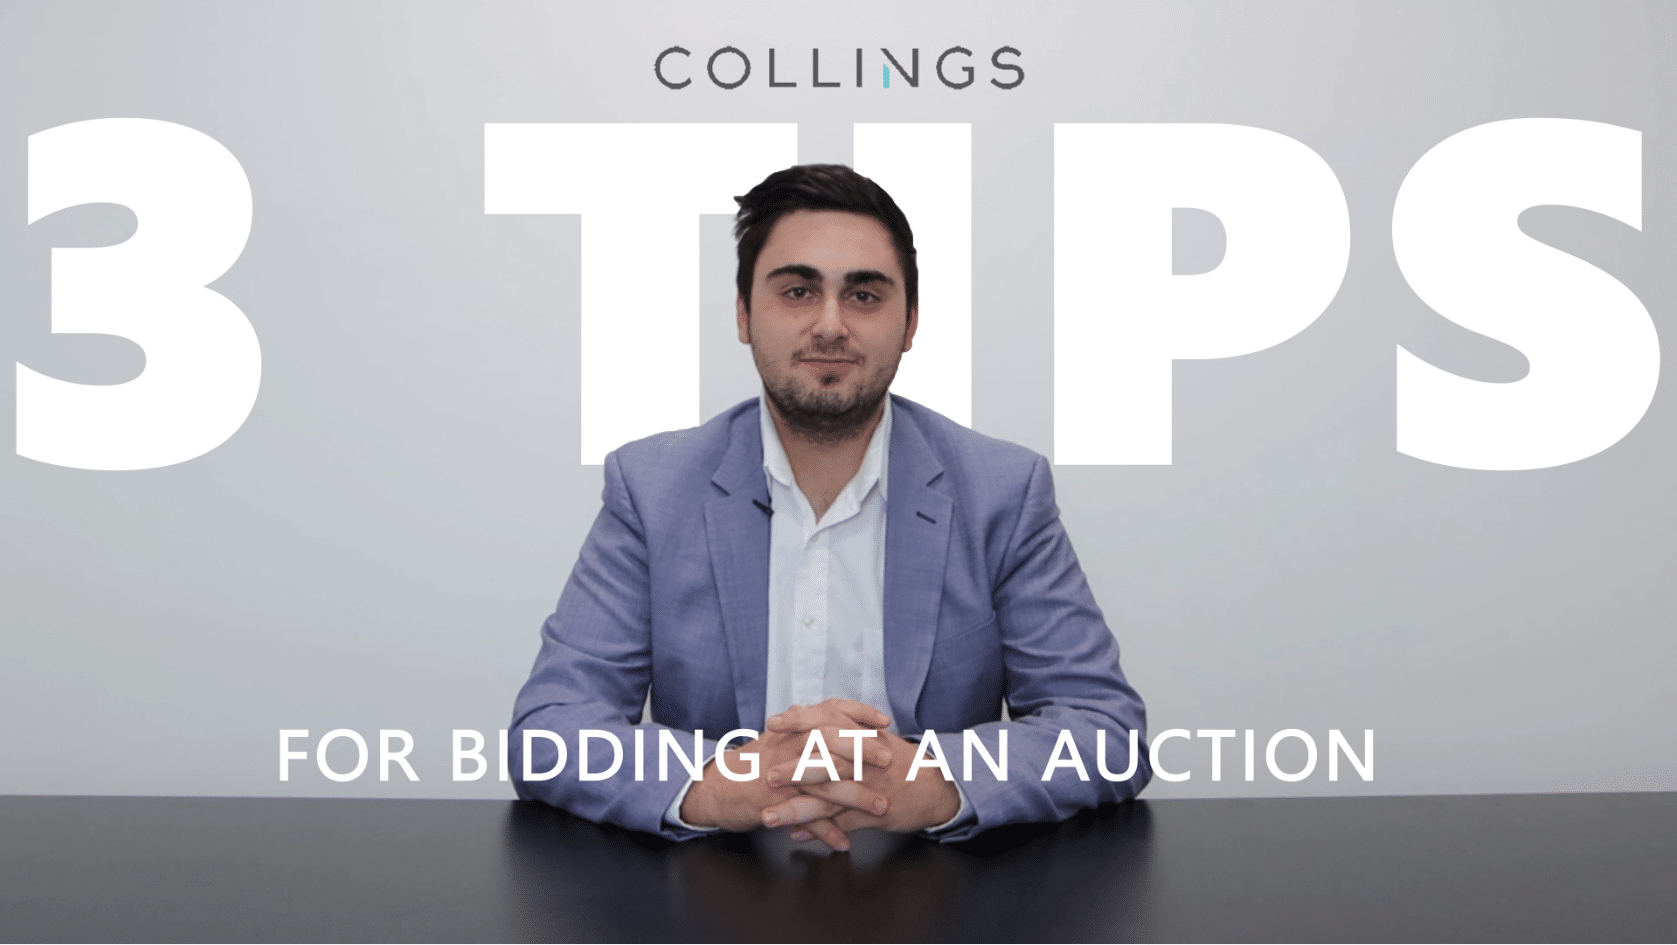 3 Tips for Bidding at an Auction